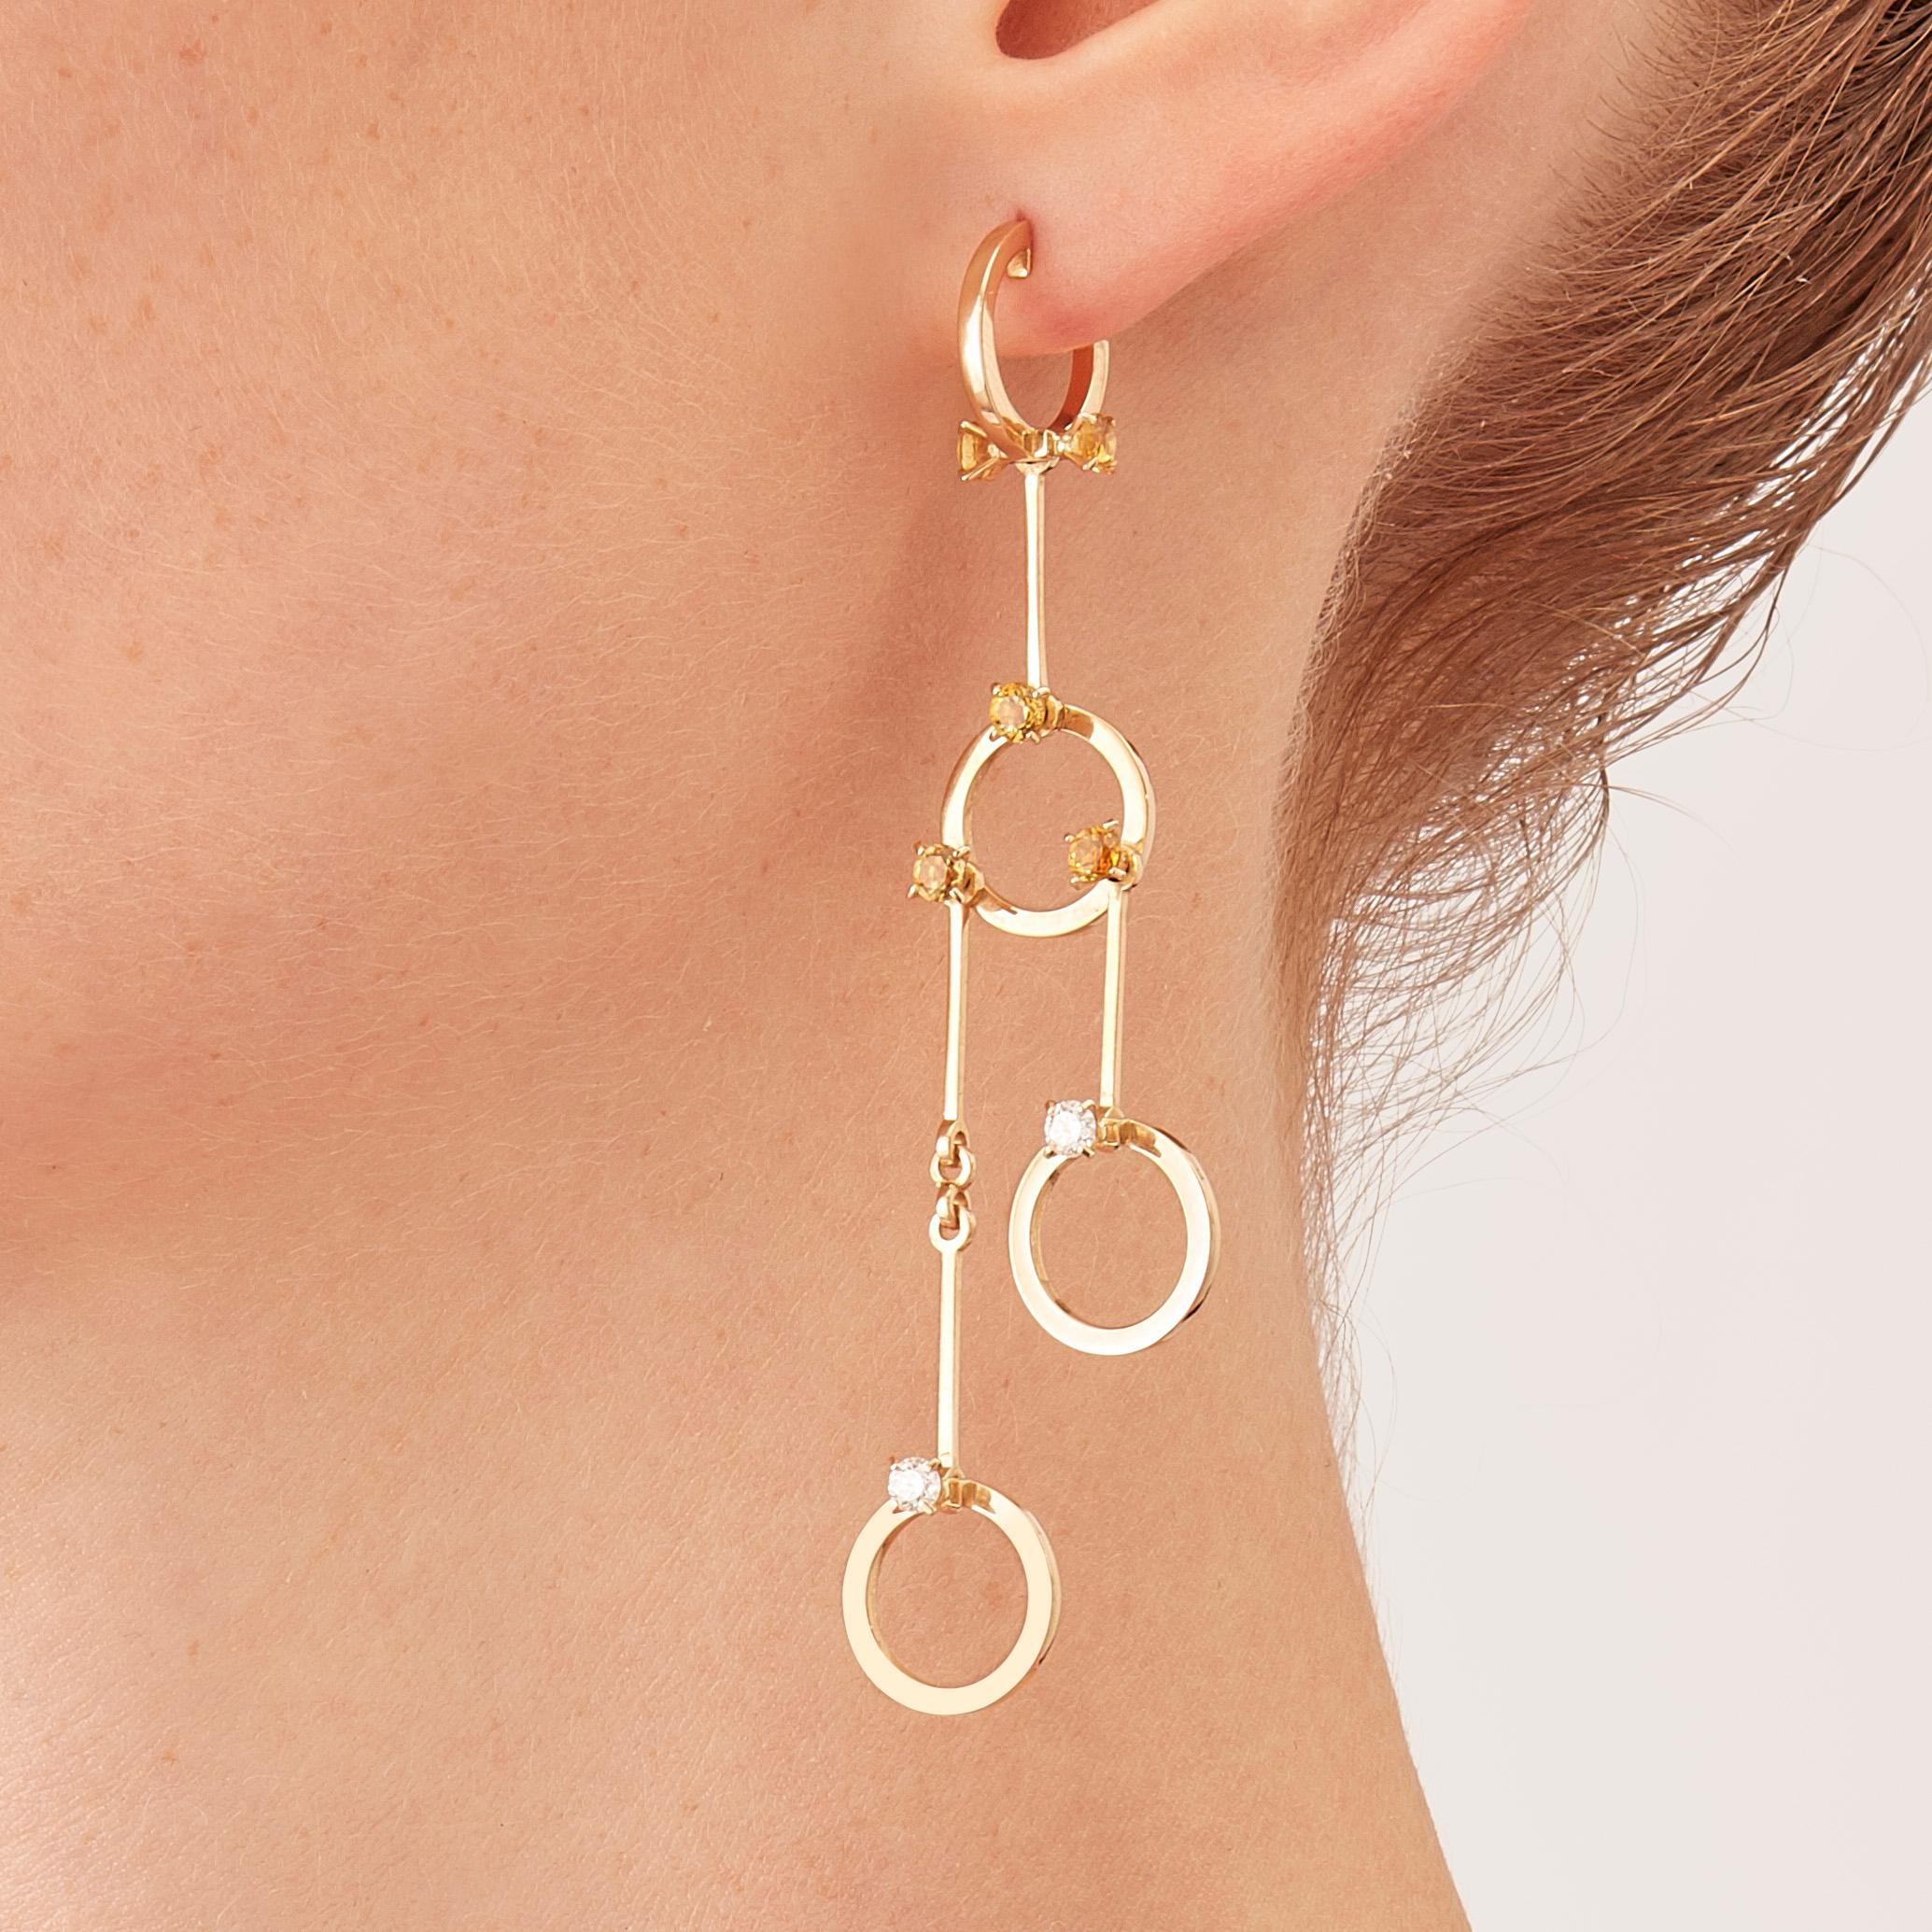 Made by hand in the Milanese atelier of Nathalie Jean, the limited edition Hoi An earrings are a graceful composition of articulated rings and bars in rosé gold, a warm, sophisticated color close to yellow gold. Miniature articulations are cleverly